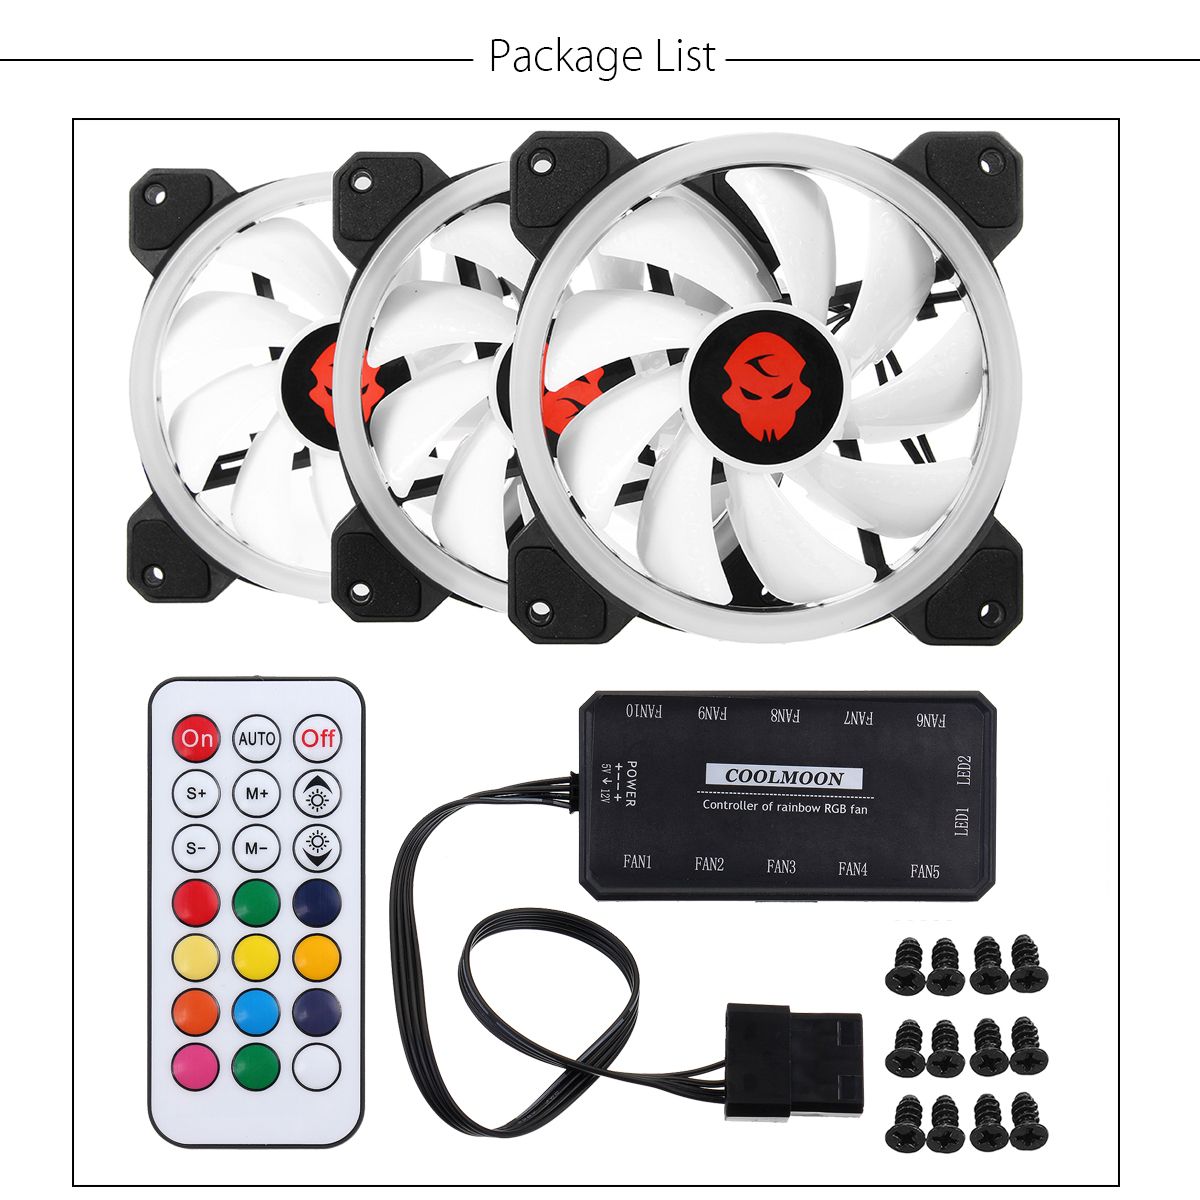 Coolmoon-3PCS-120mm-Adjustable-RGB-LED-Light-Computer-Case-PC-Cooling-Fan-with-Remote-1216398